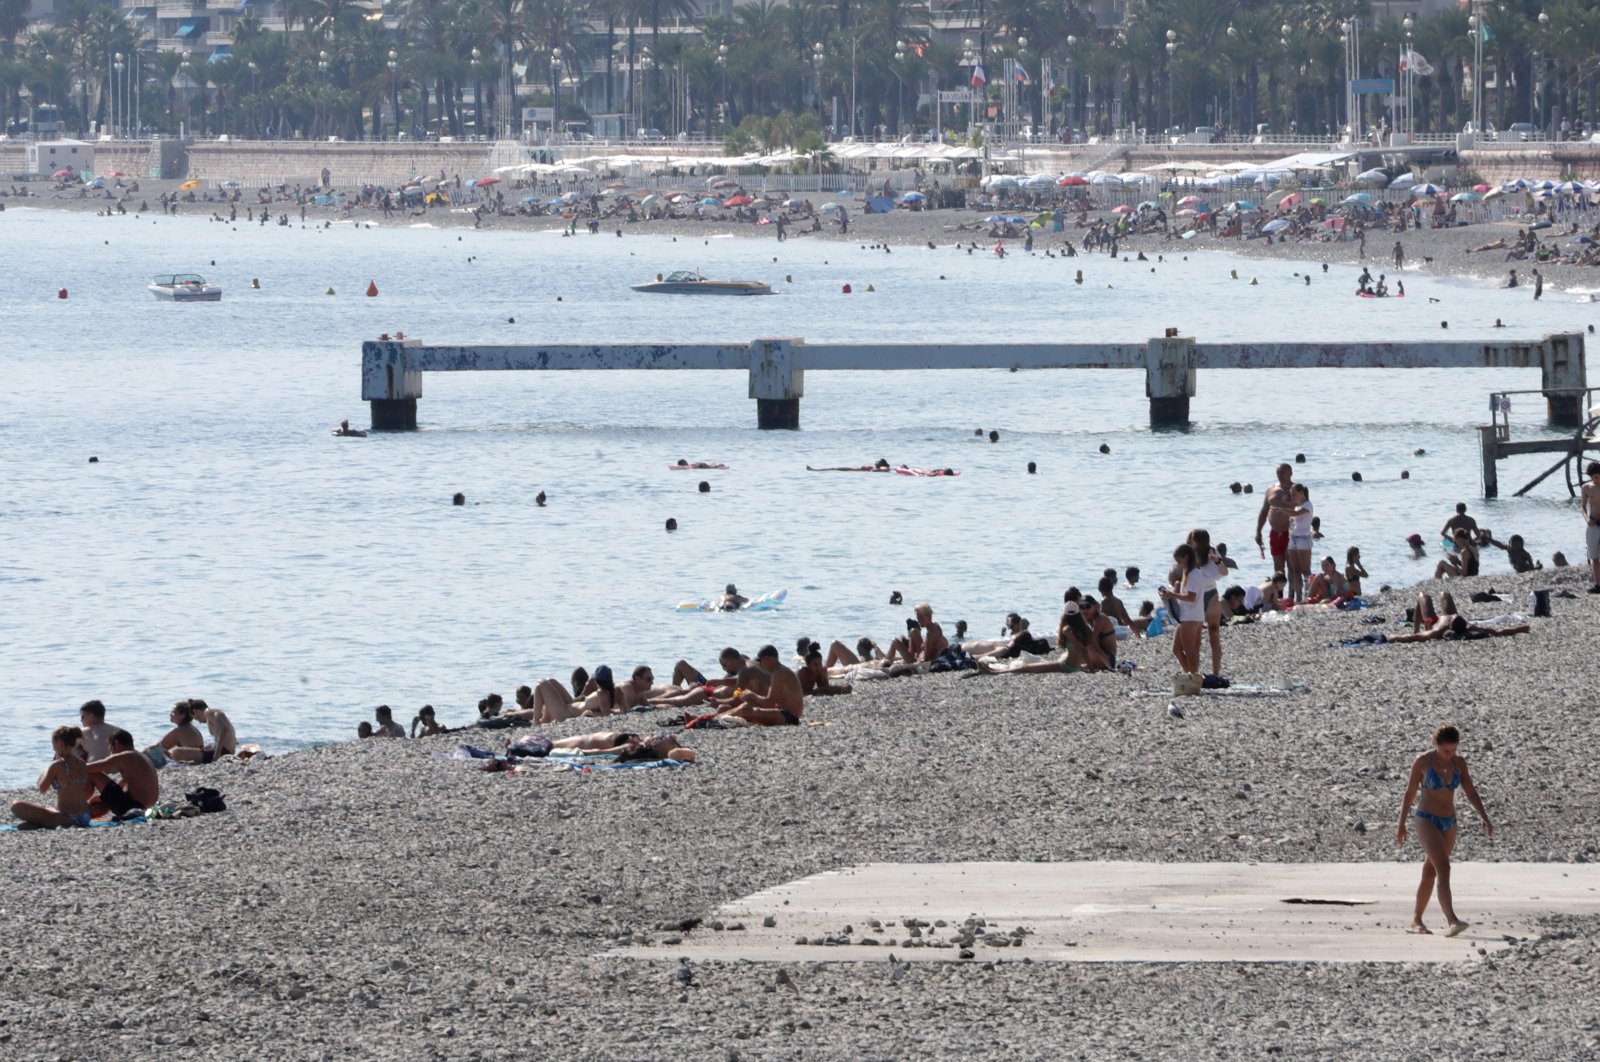 People enjoy a warm and sunny day on the beach in Nice, France, September 14, 2020. (Reuters Photo)